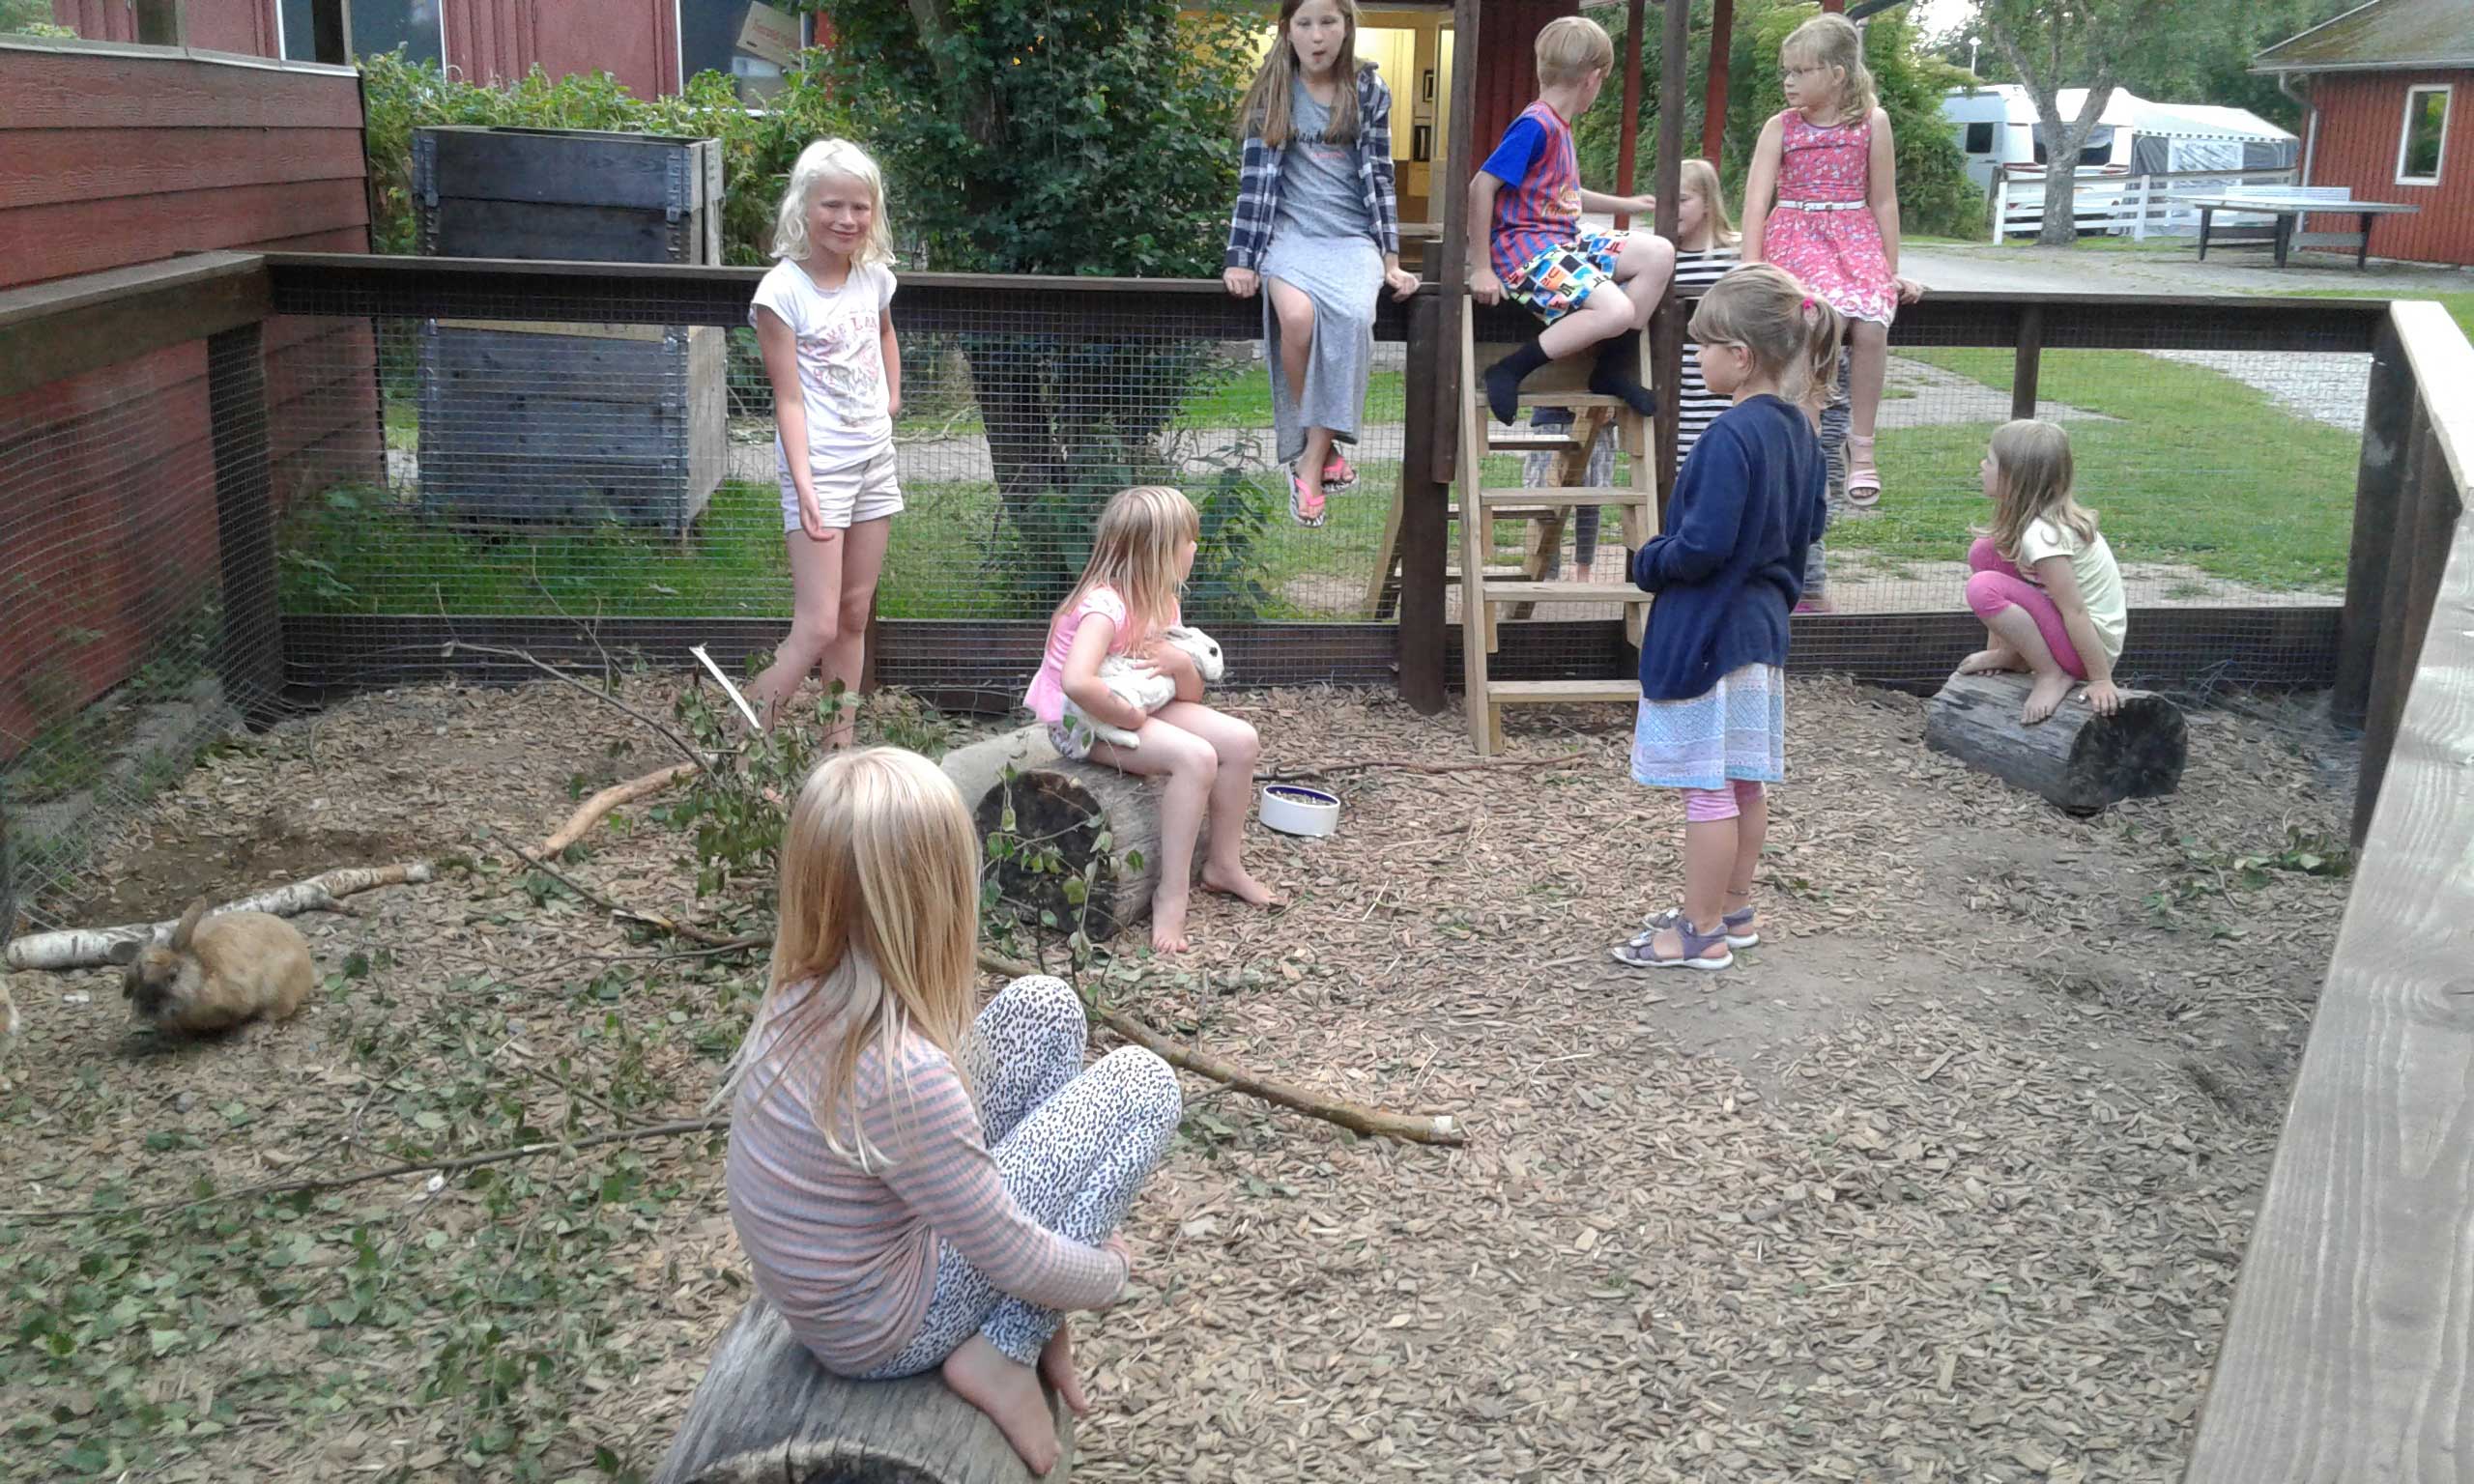 Some of the children who visited us helped feed the rabbits - Horsens City Camping